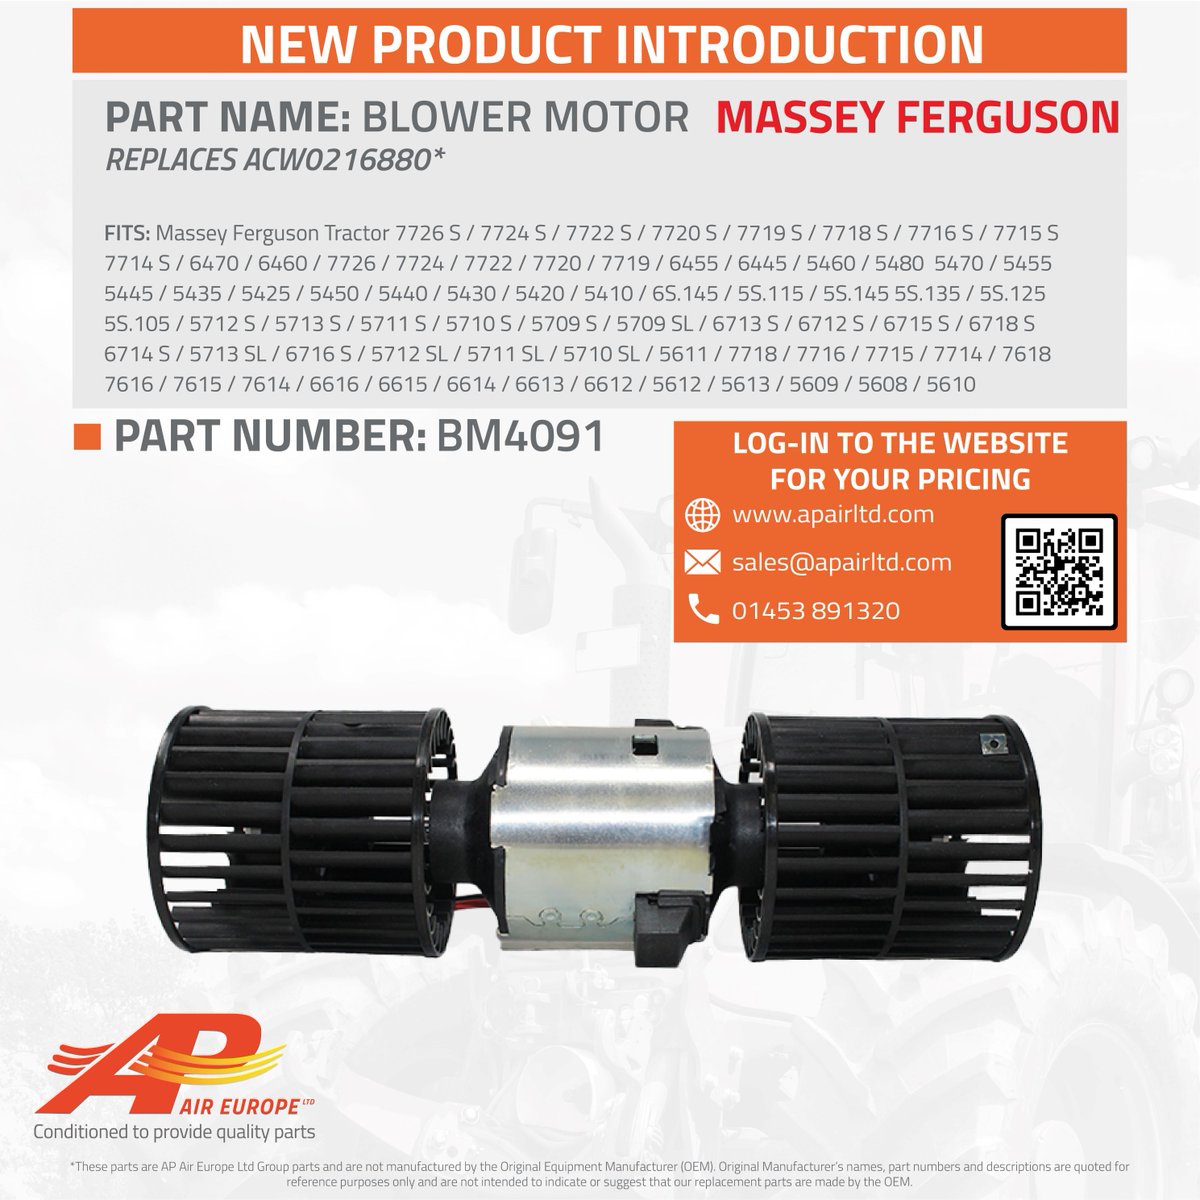 NEW #BlowerMotor for 🔴 Massey Ferguson 🔴
✅ Our part BM4091 is the latest #airconpart in our range for #AGCO #machinery
✅ 12V #OEM blower motor with wheels
✅ Fits 60+ #MasseyFerguson #tractors
🌐 Log-in online for P&A or ☎️ 01453 891320
apairltd.com/products/agric…
#agriculture